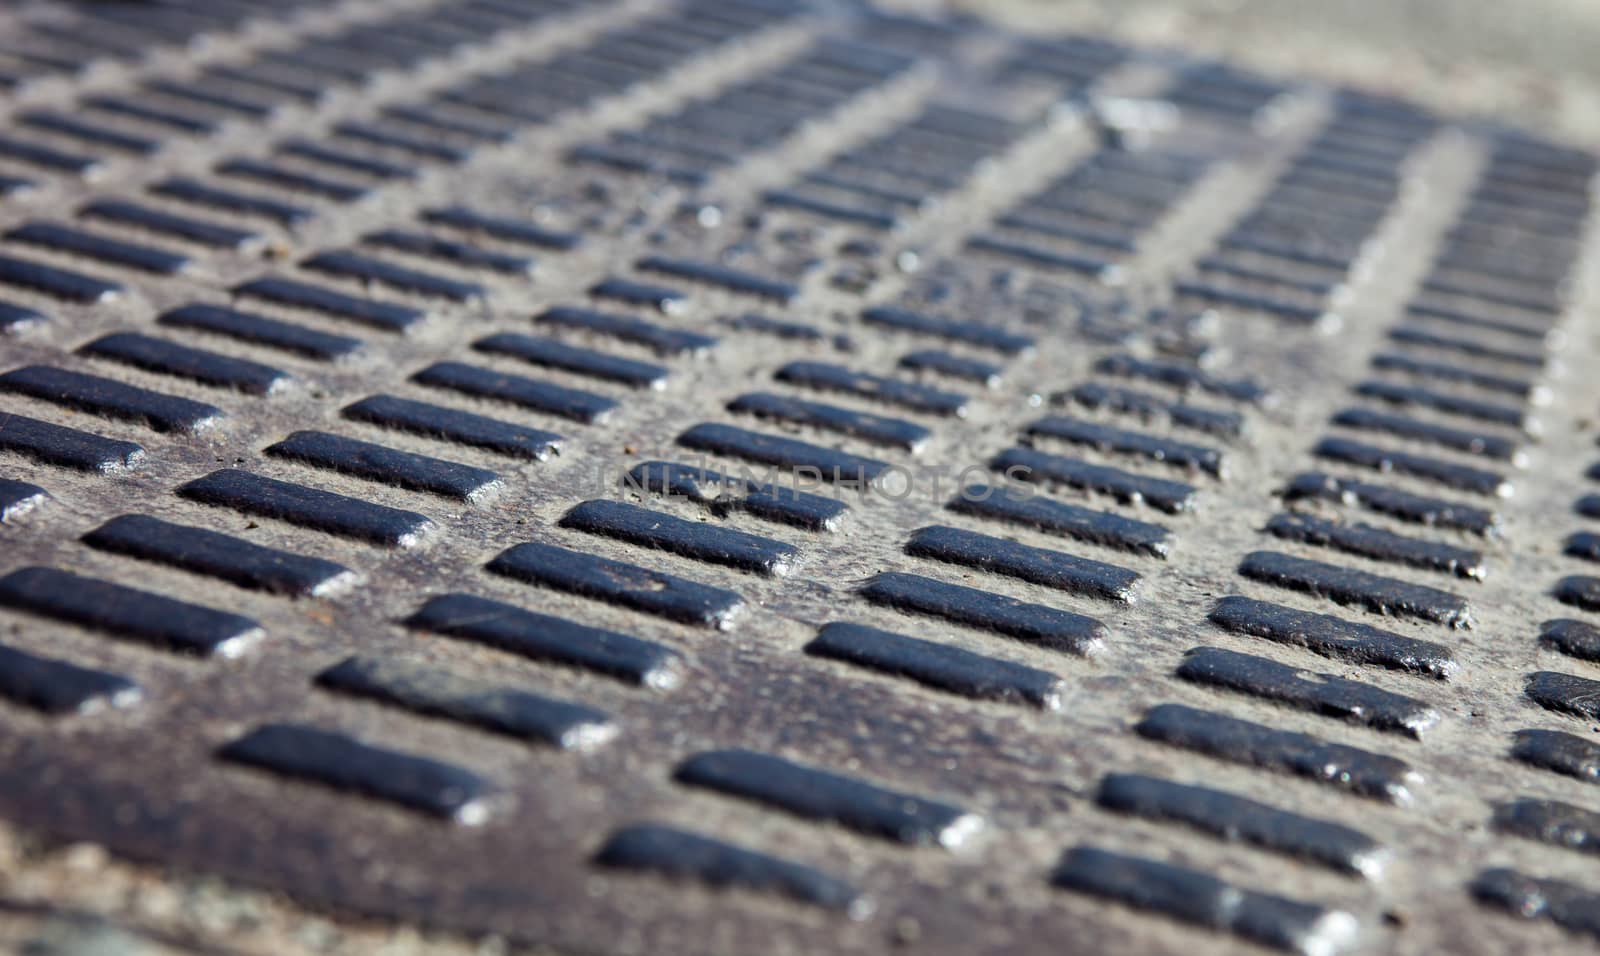 Close up of the metal manhole cover by rootstocks